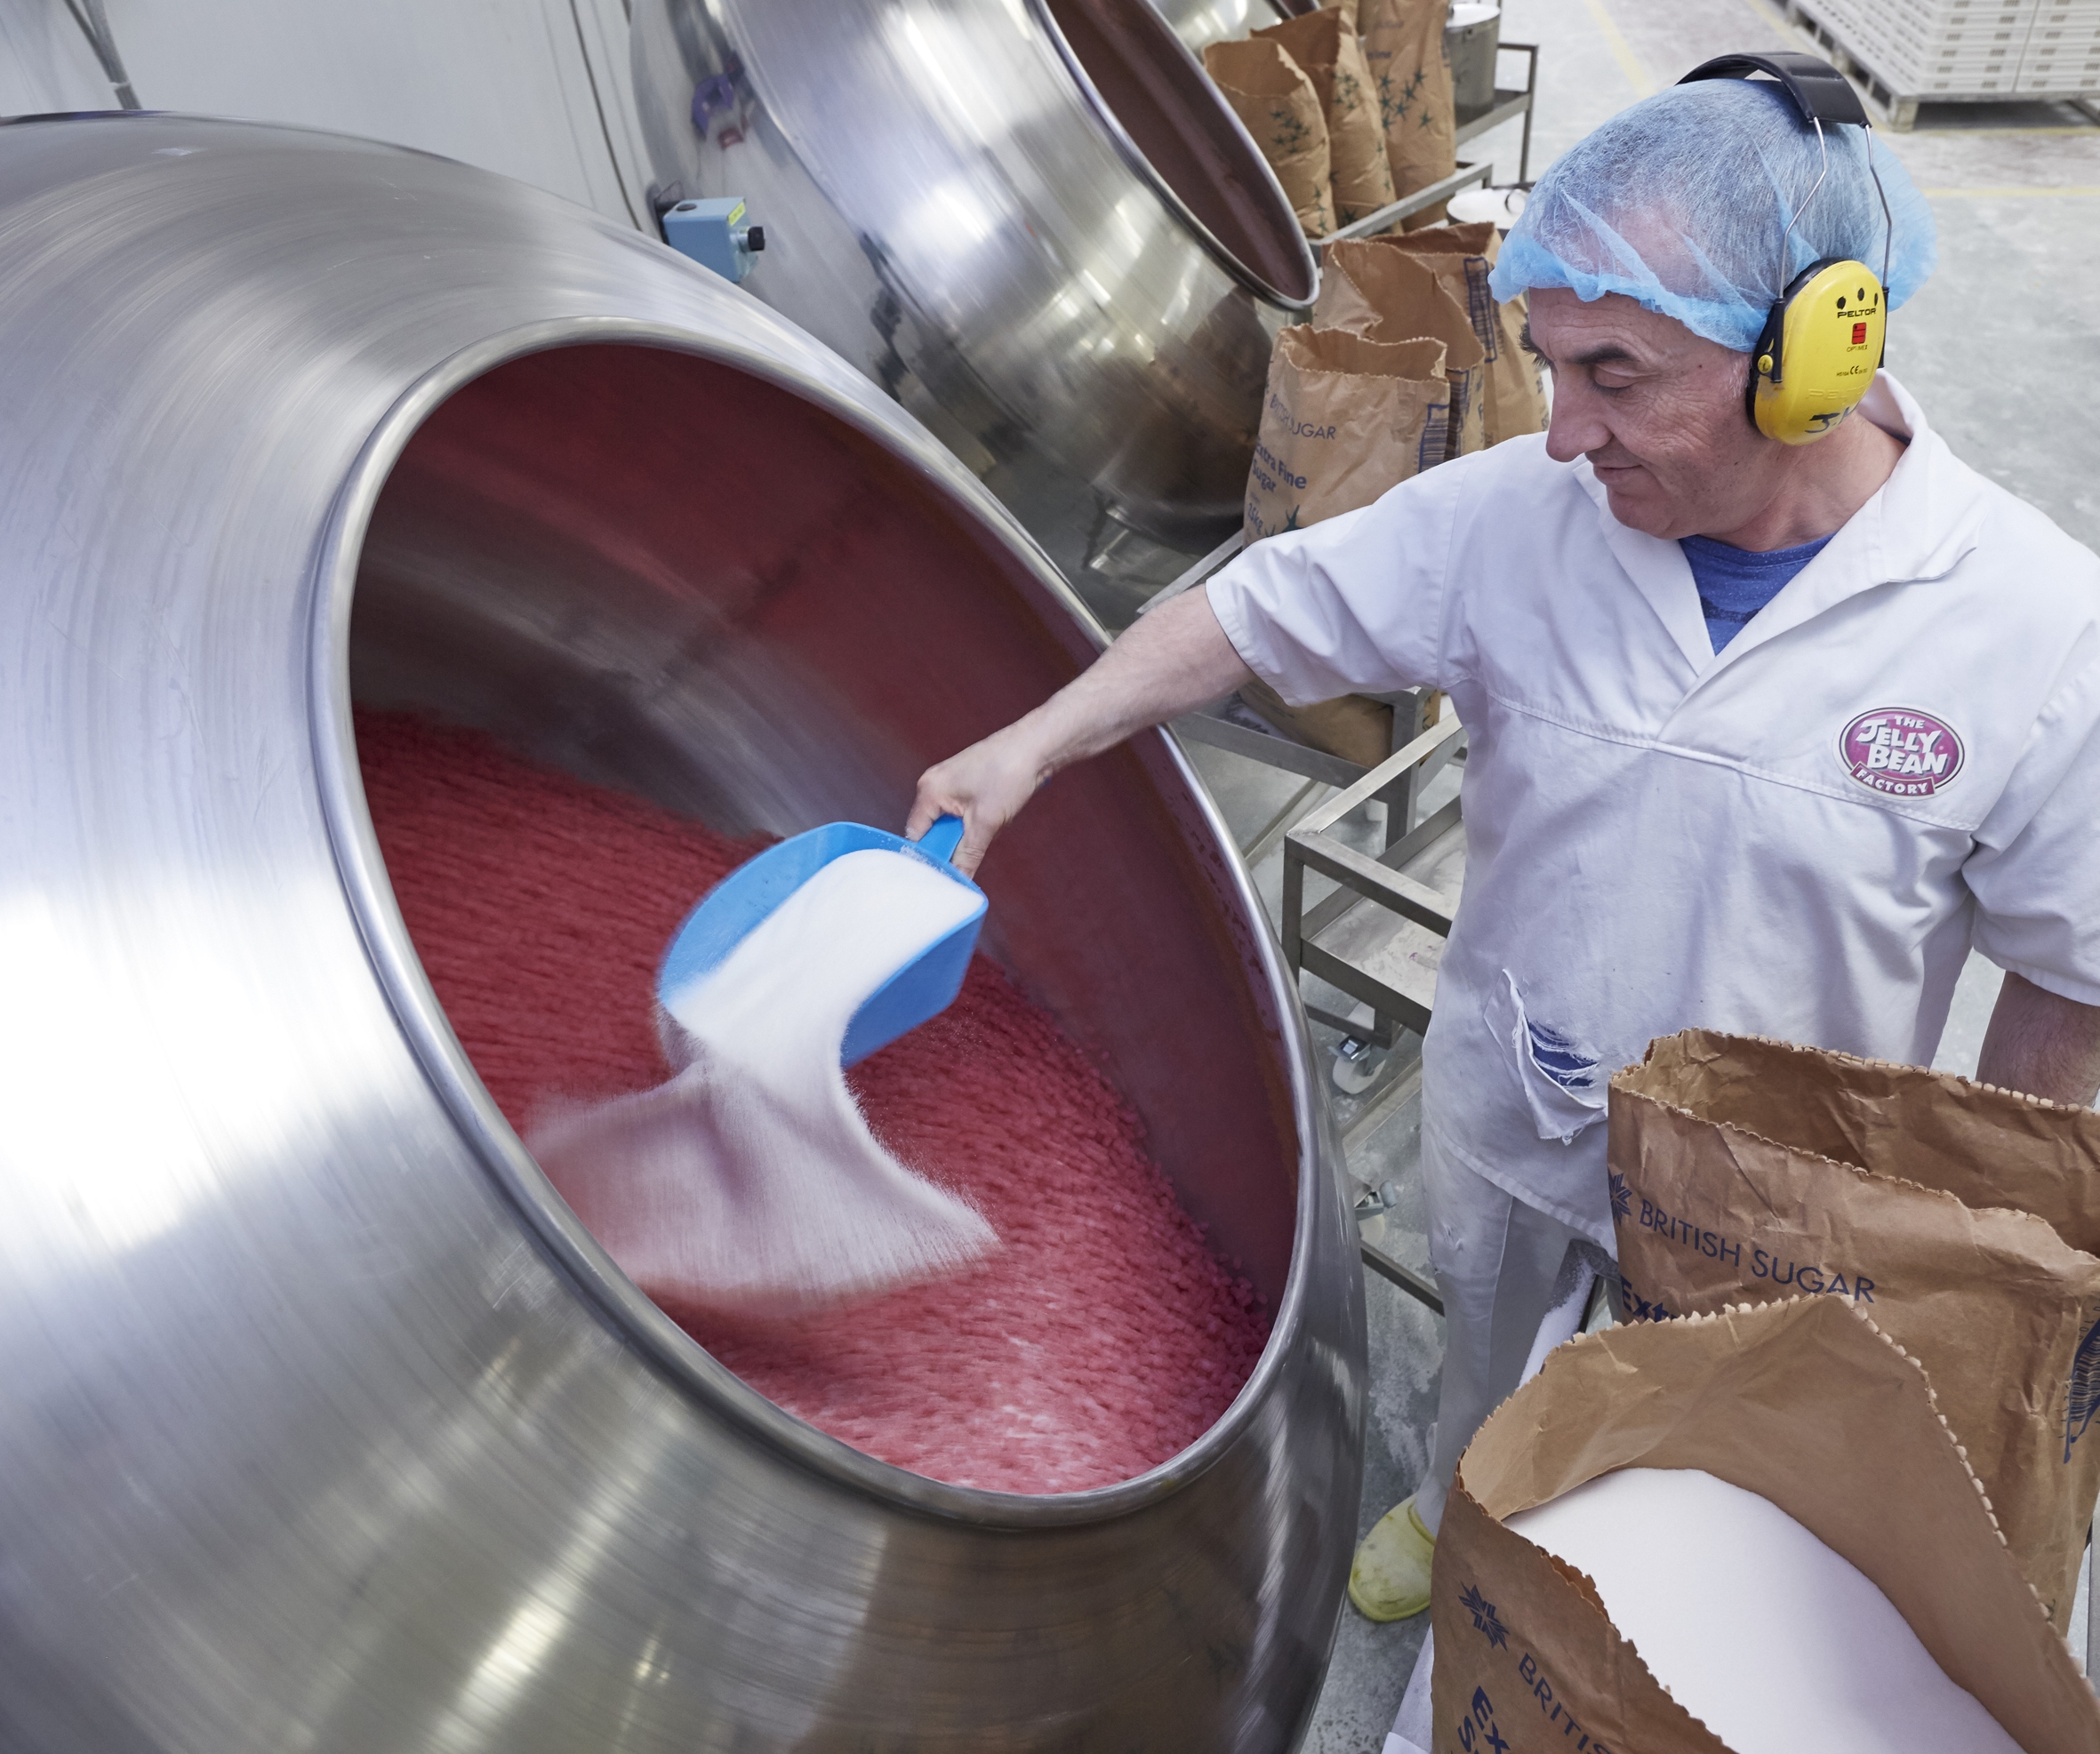 jelly bean maker mixing sugar into the vats of candy